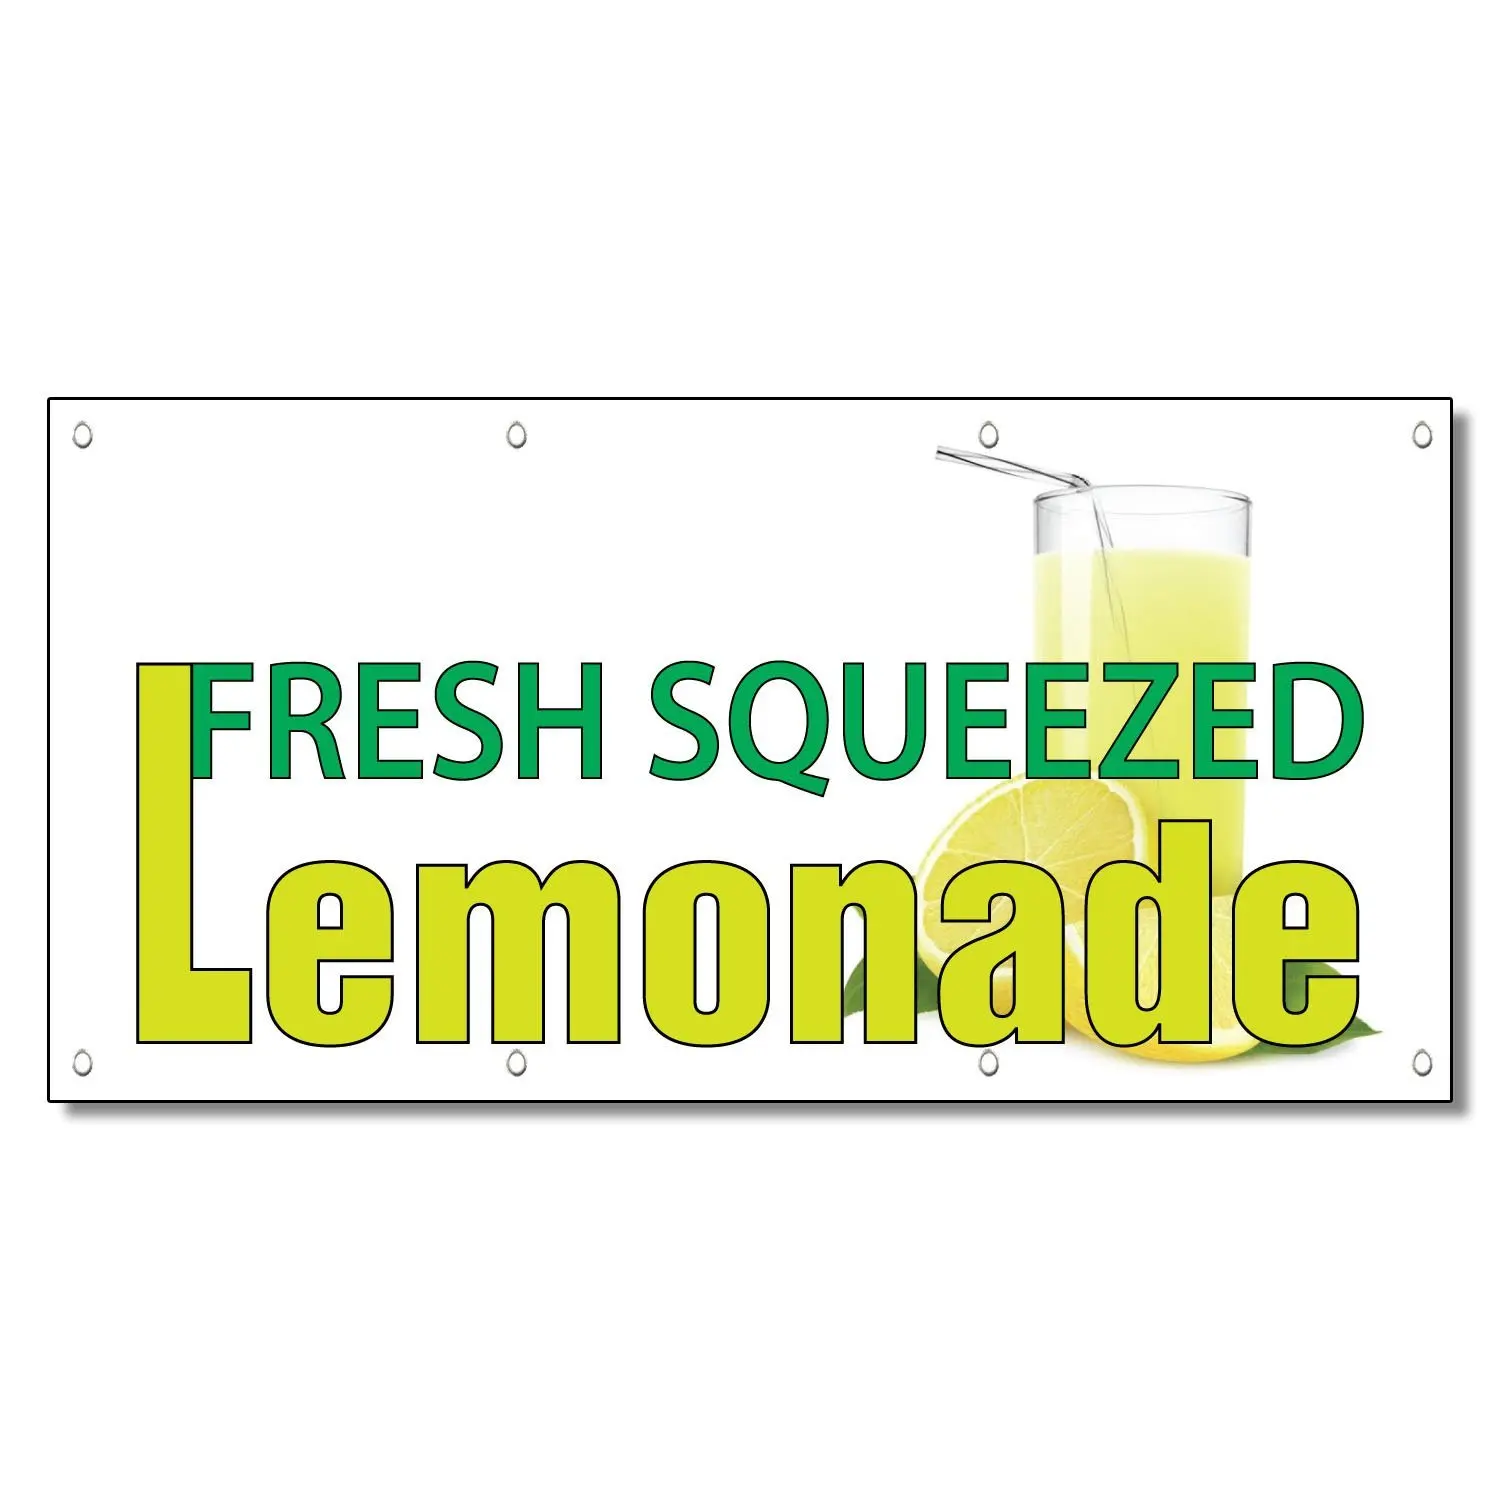 FRESH SQUEEZED LEMONADE Vinyl Banner Concession Food Sign 1x10 ft yb